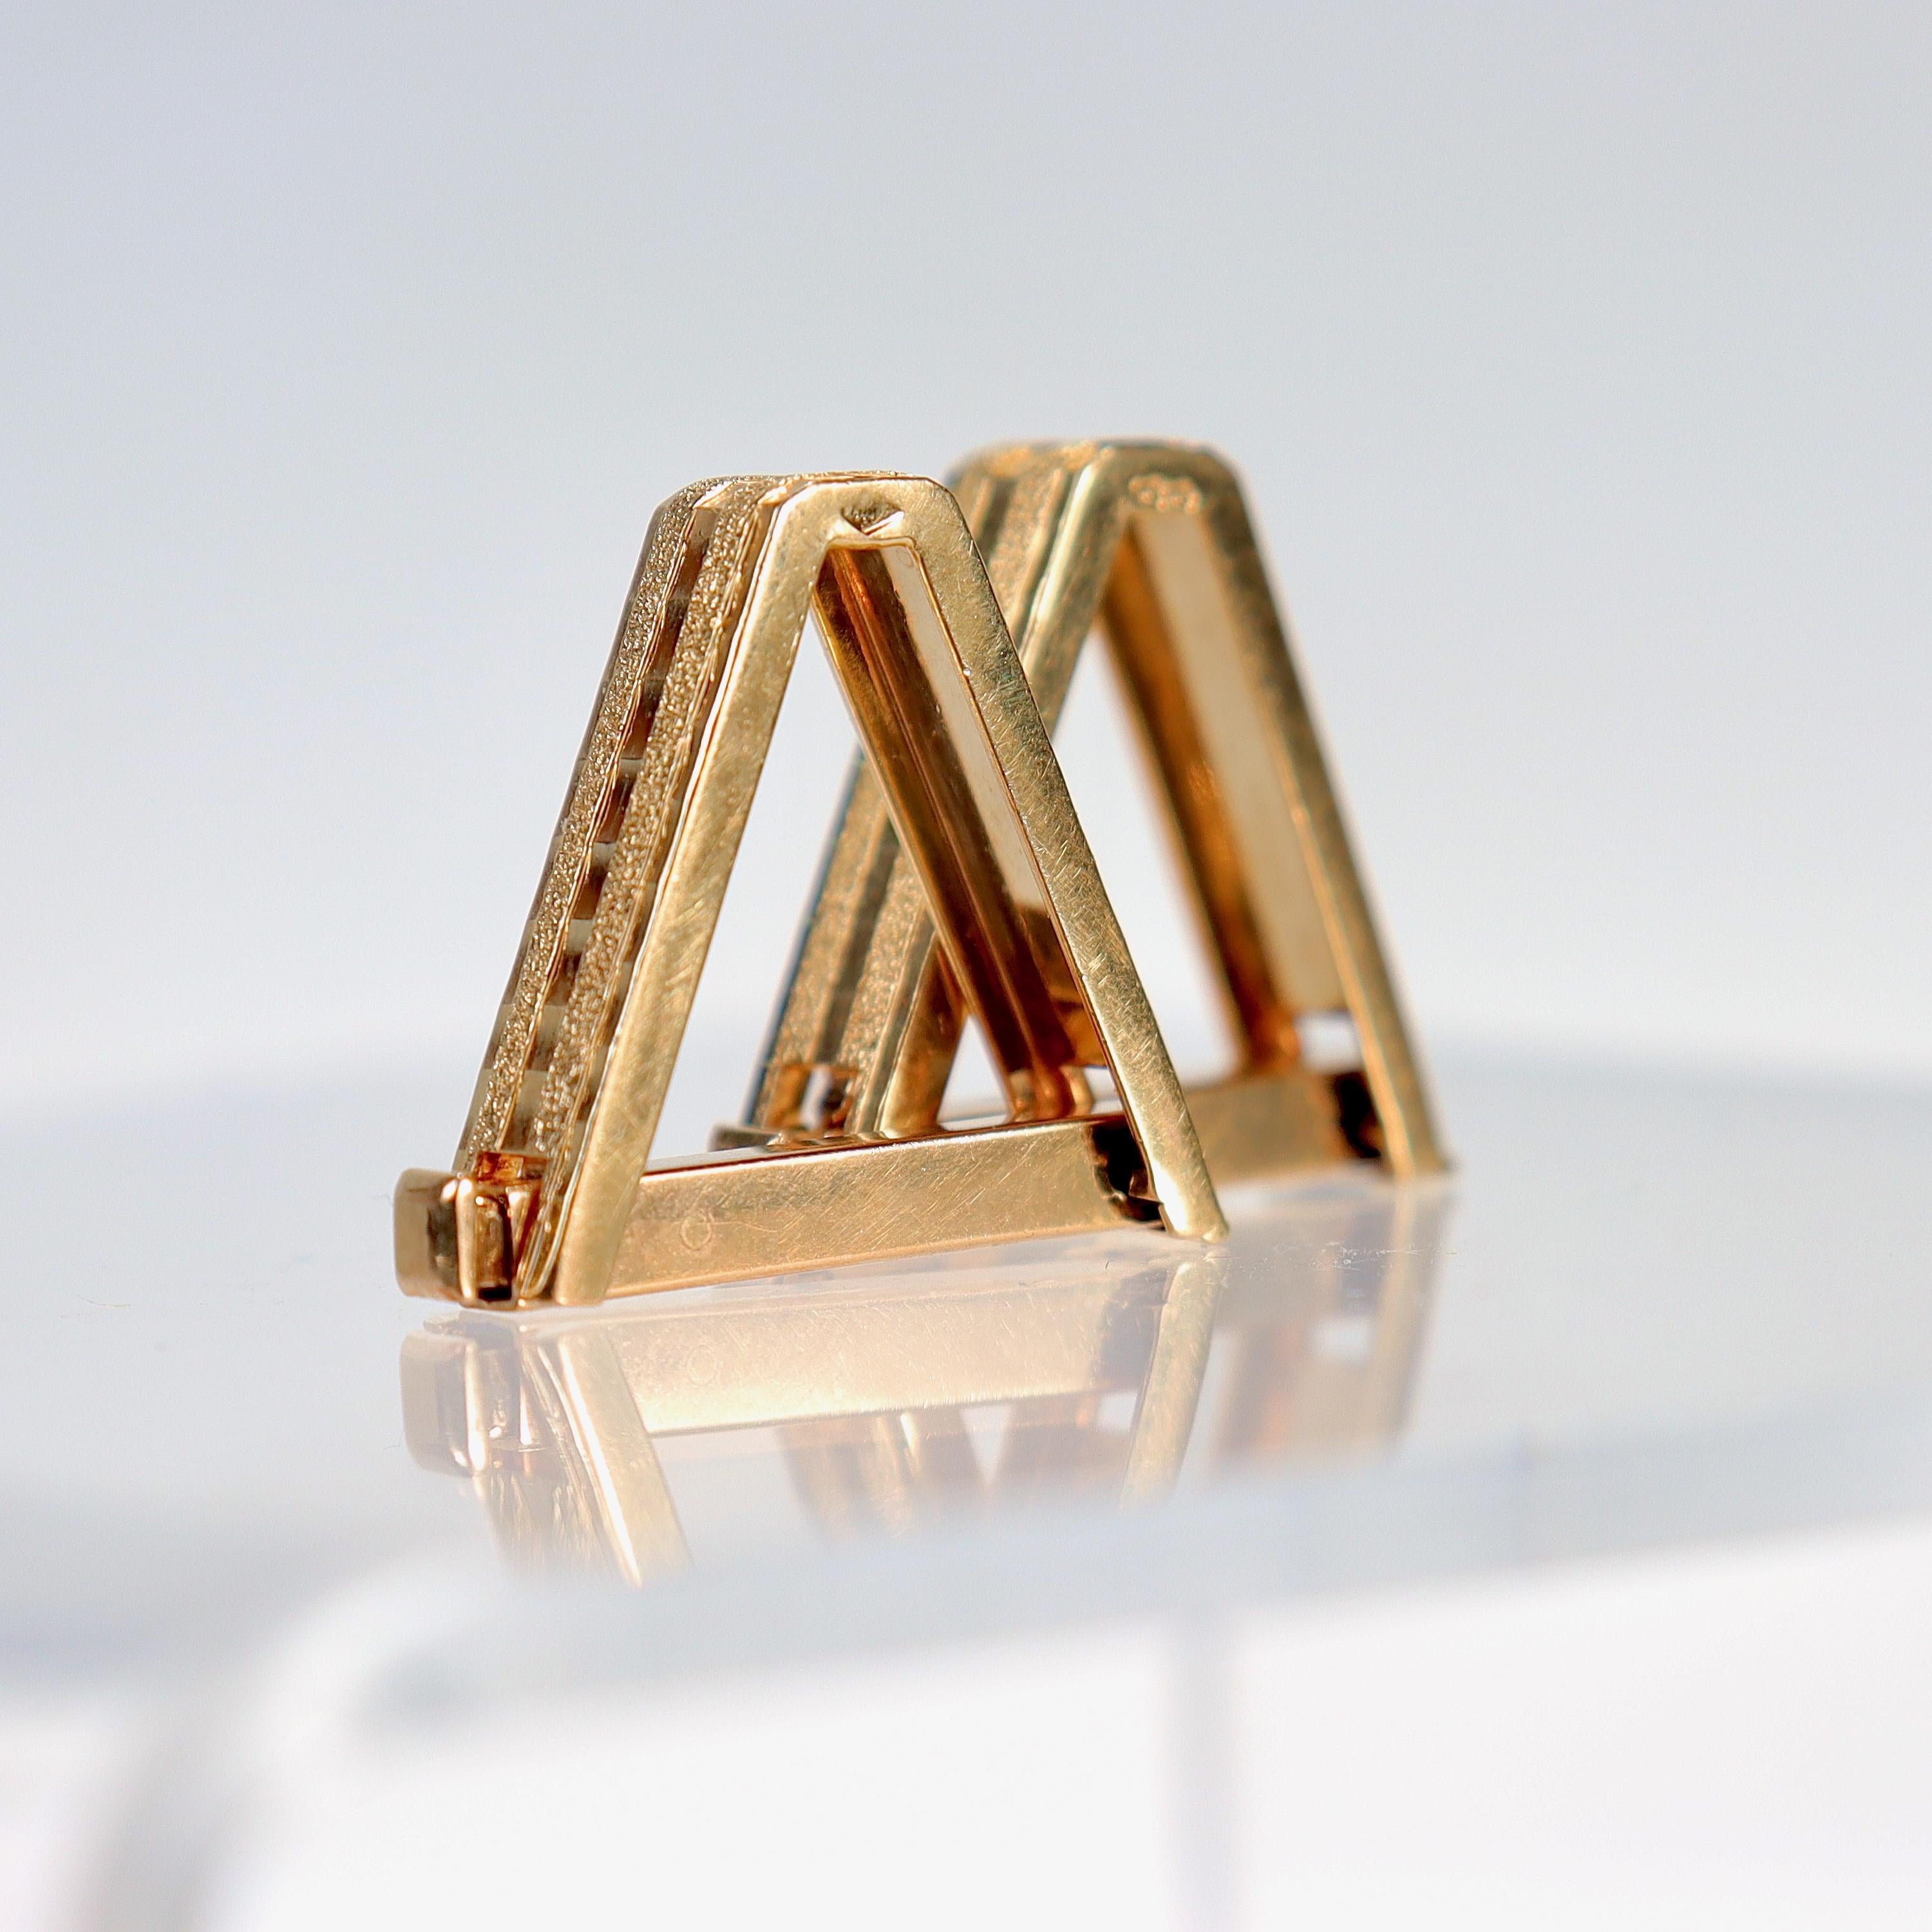 Signed 18 Karat French Gold Triangular or Wrapped Cufflinks For Sale 5